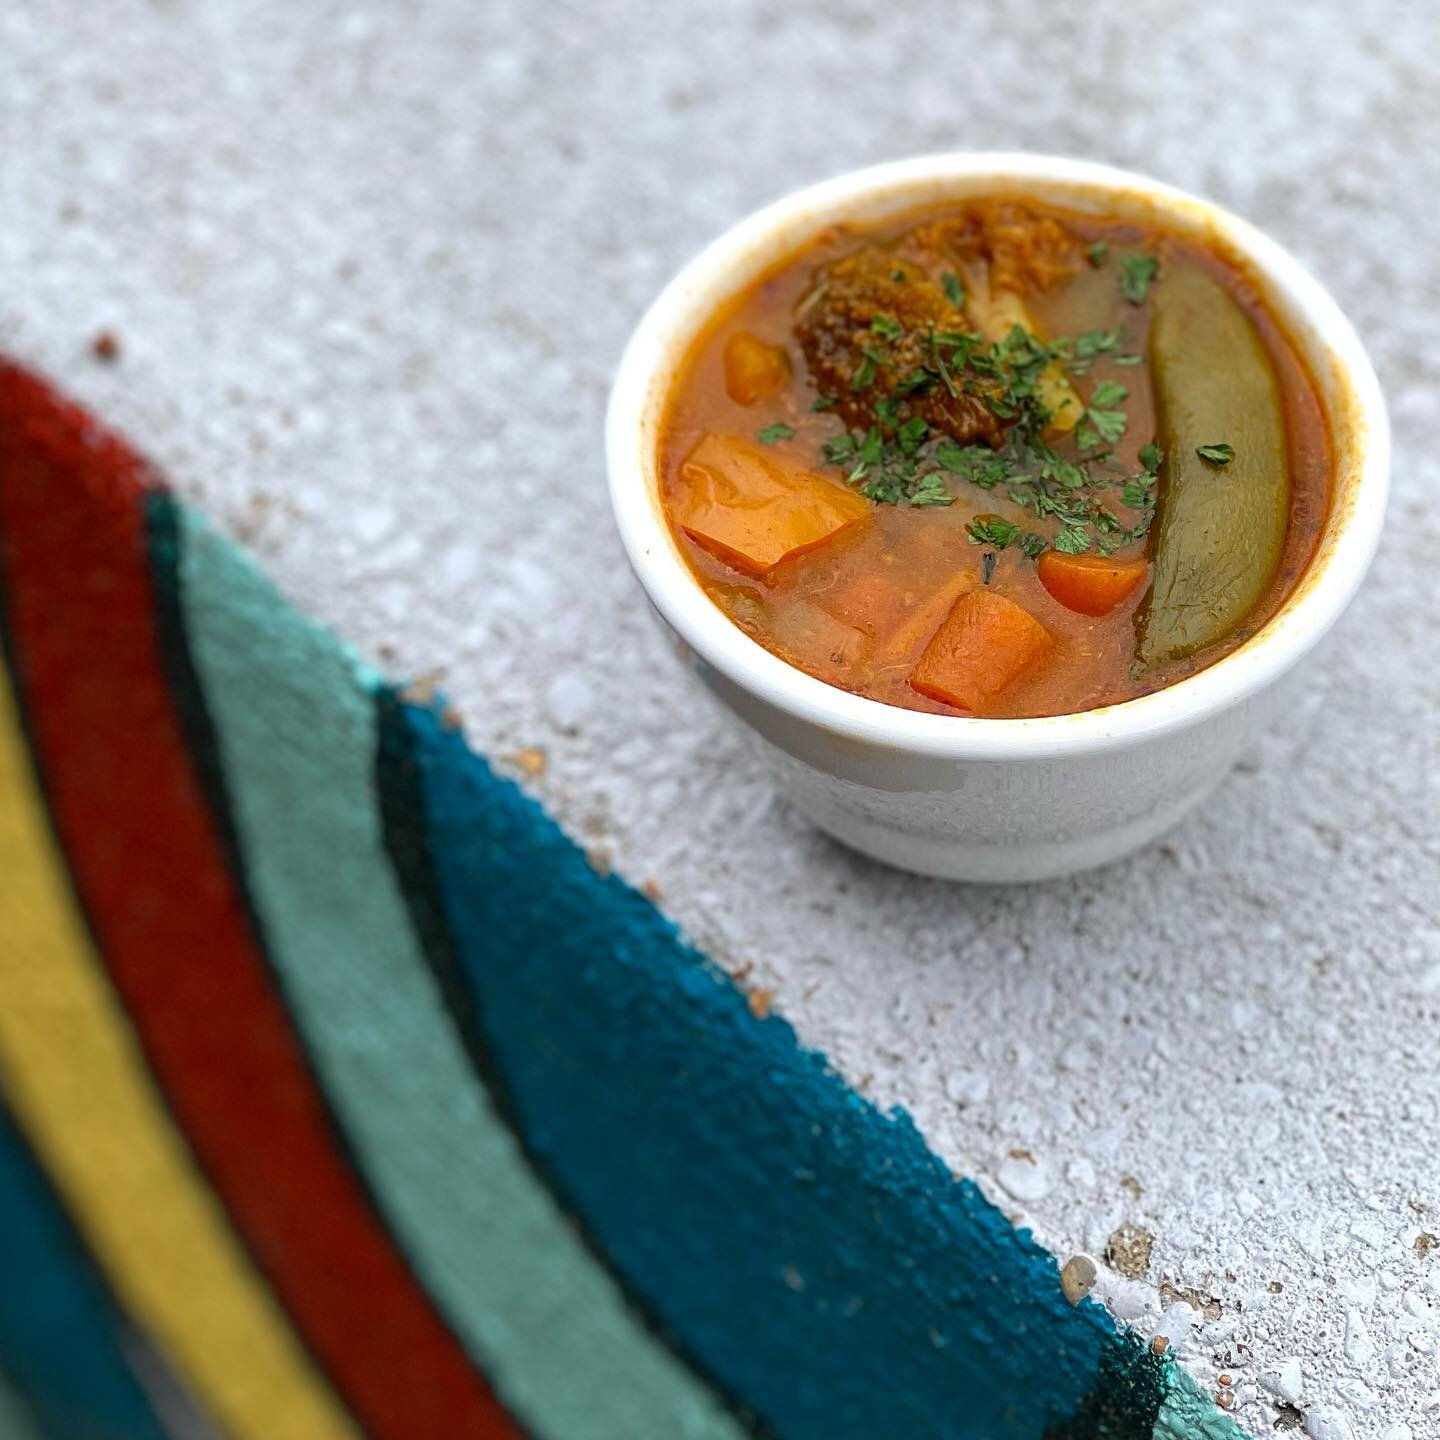 Every day with a chance of rain calls for soup! 🌧️🥣
&bull;
We are offering a tasty vegan Thai curry &amp; rice soup today that is sure to give you all the stormy weather cozy feelings you need! Available as a bowl or a side cup for any of our entre